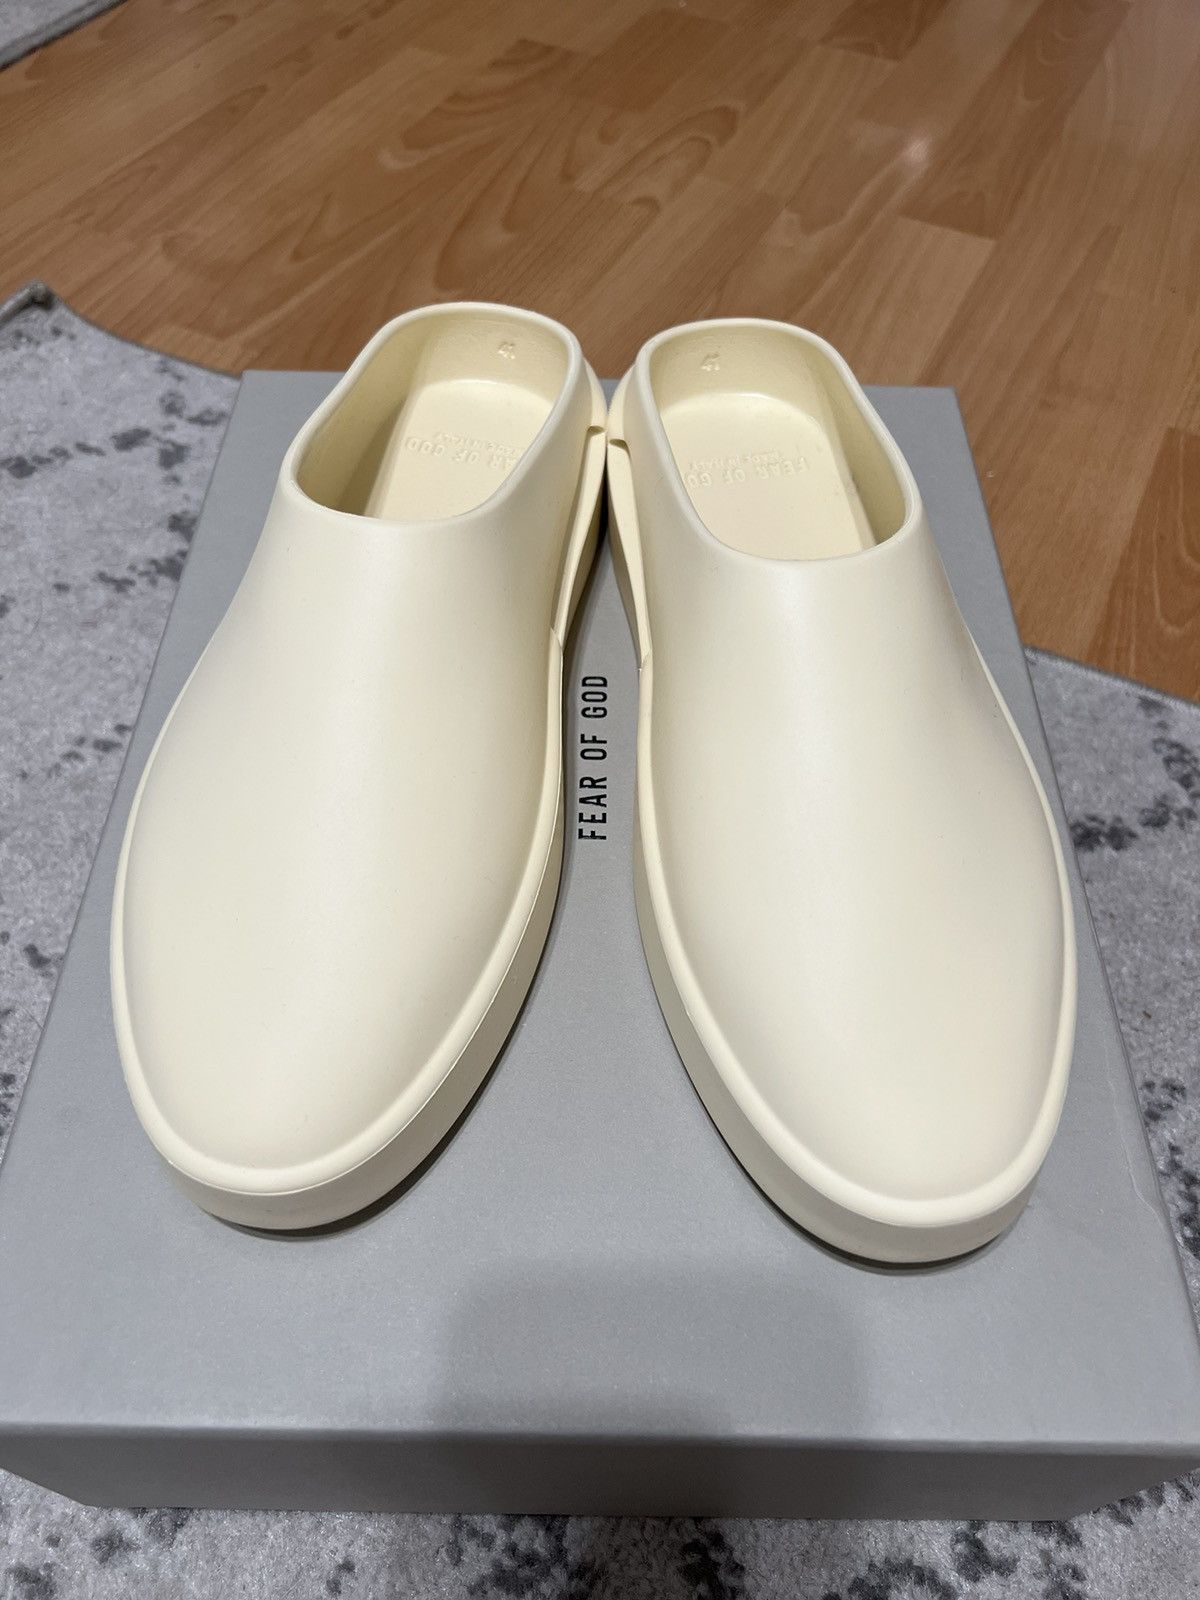 Fear of God The California Slides Fear of God Size 41 (US 9) | Grailed